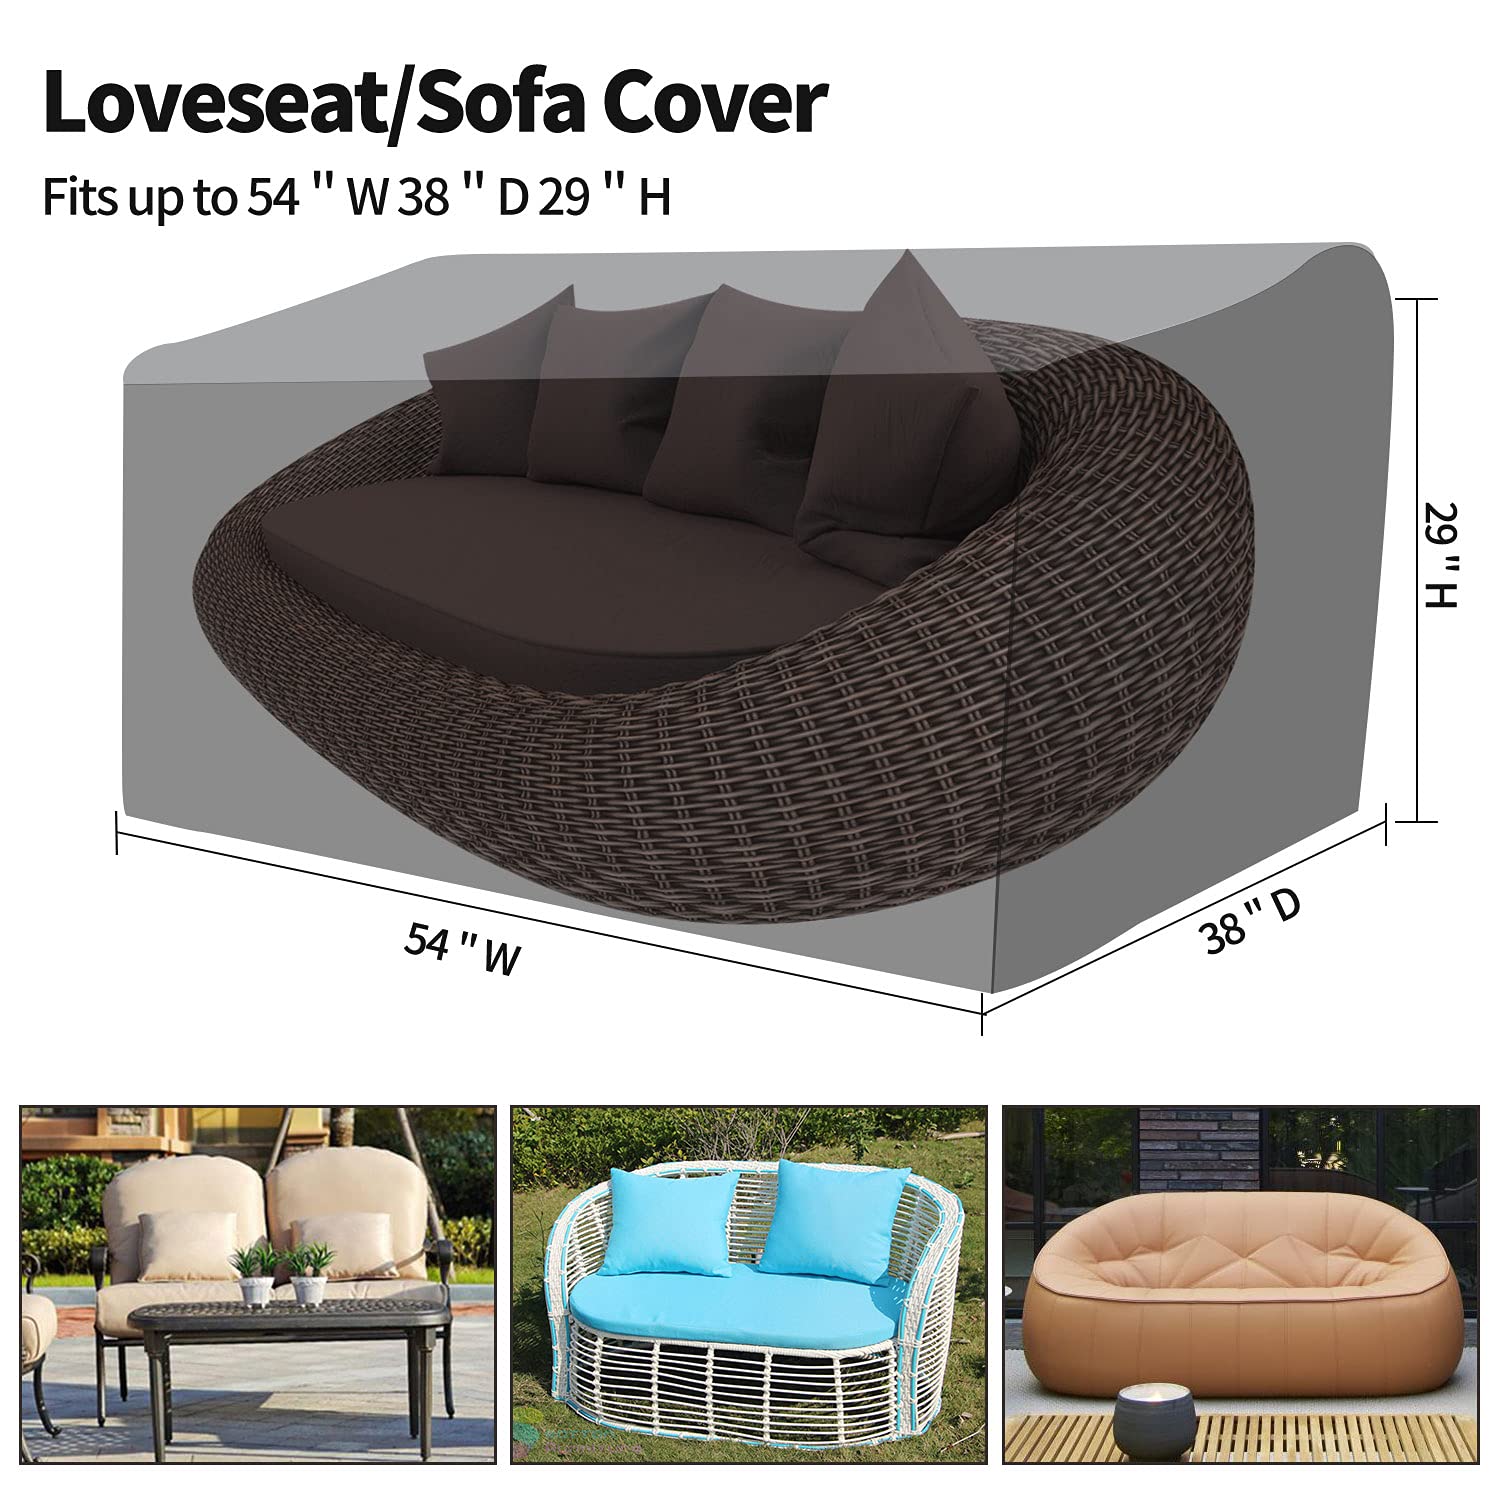 delightLife Sofa Cover Outdoor Loveseat Cover, Patio Furniture Covers Waterproof 600D, 54 Inch Patio Loveseat Cover Fits for 2-3 Seats (54" W x 38" D x 20"/29" H)